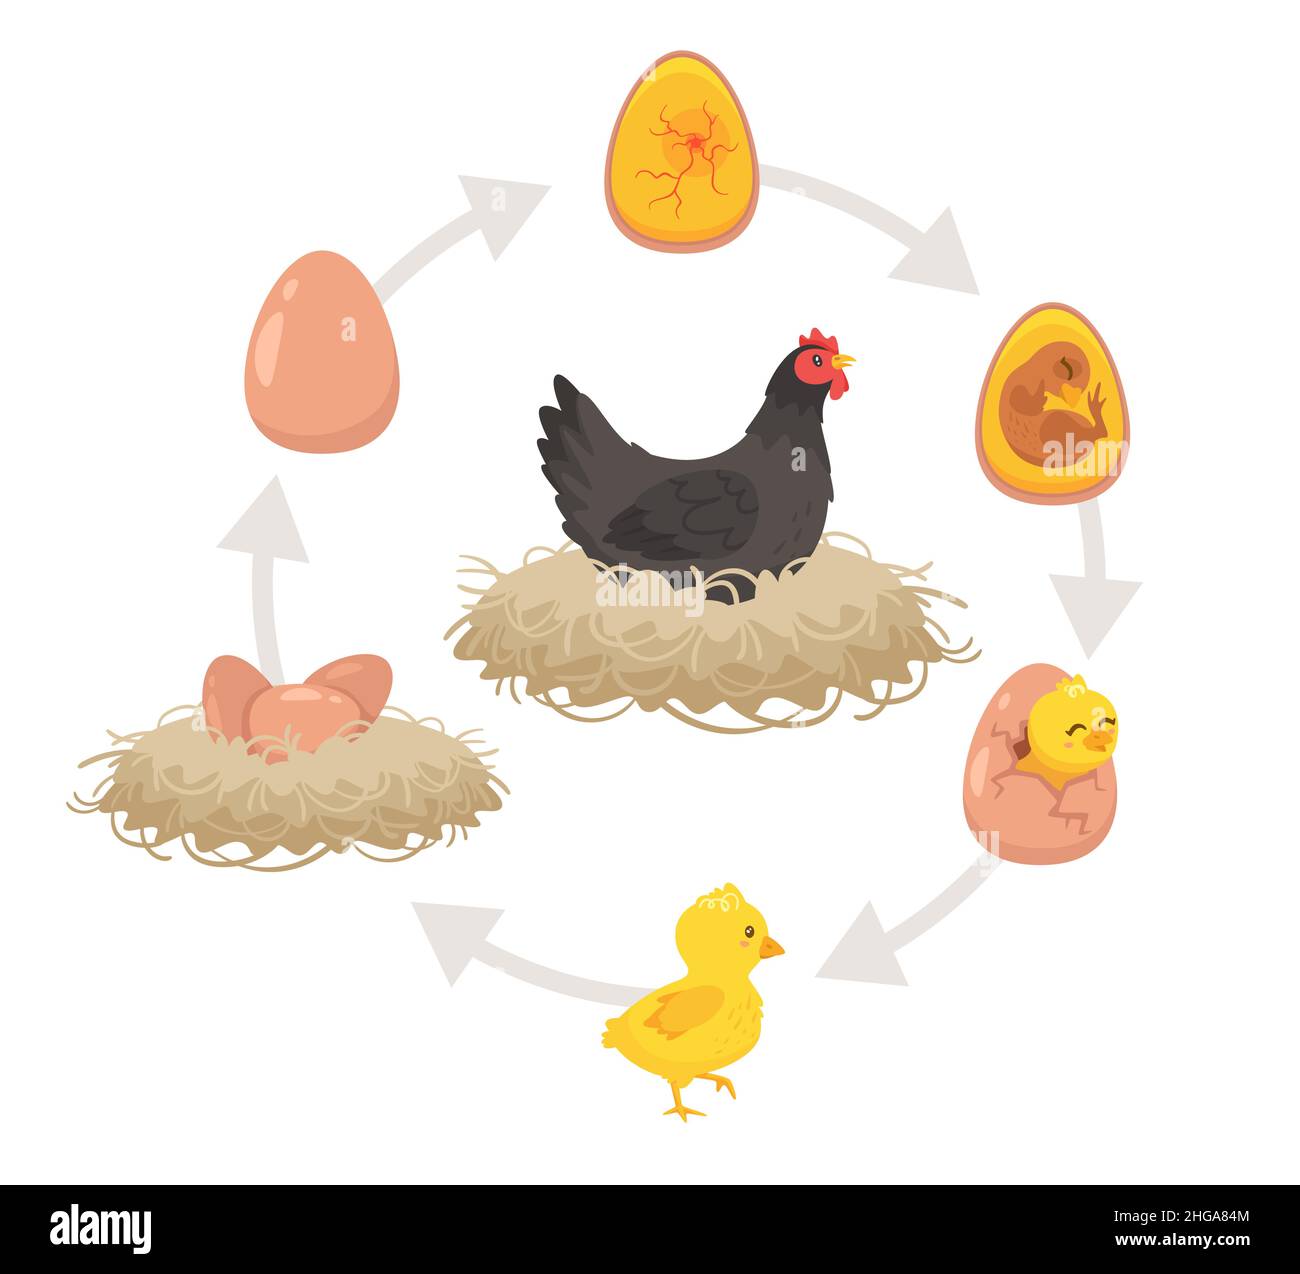 Kids educational scheme of the hatching process. Stock Vector